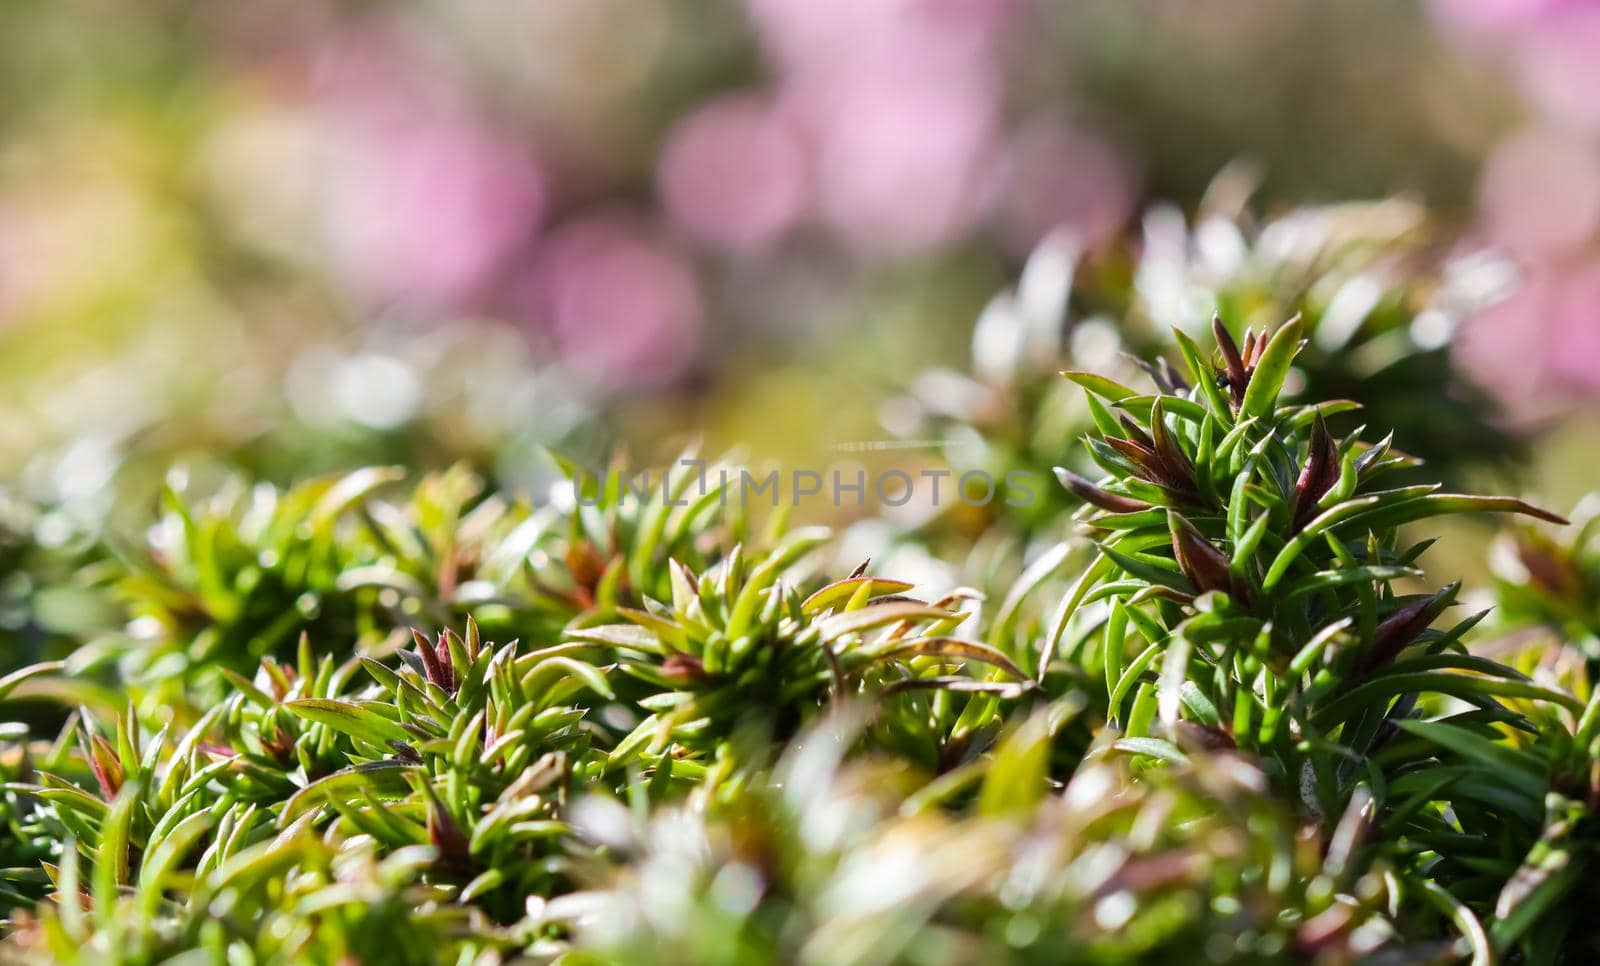 Green background of long spreading stems, foliage and buds of Creeping Phlox flowers in the garden by Olayola